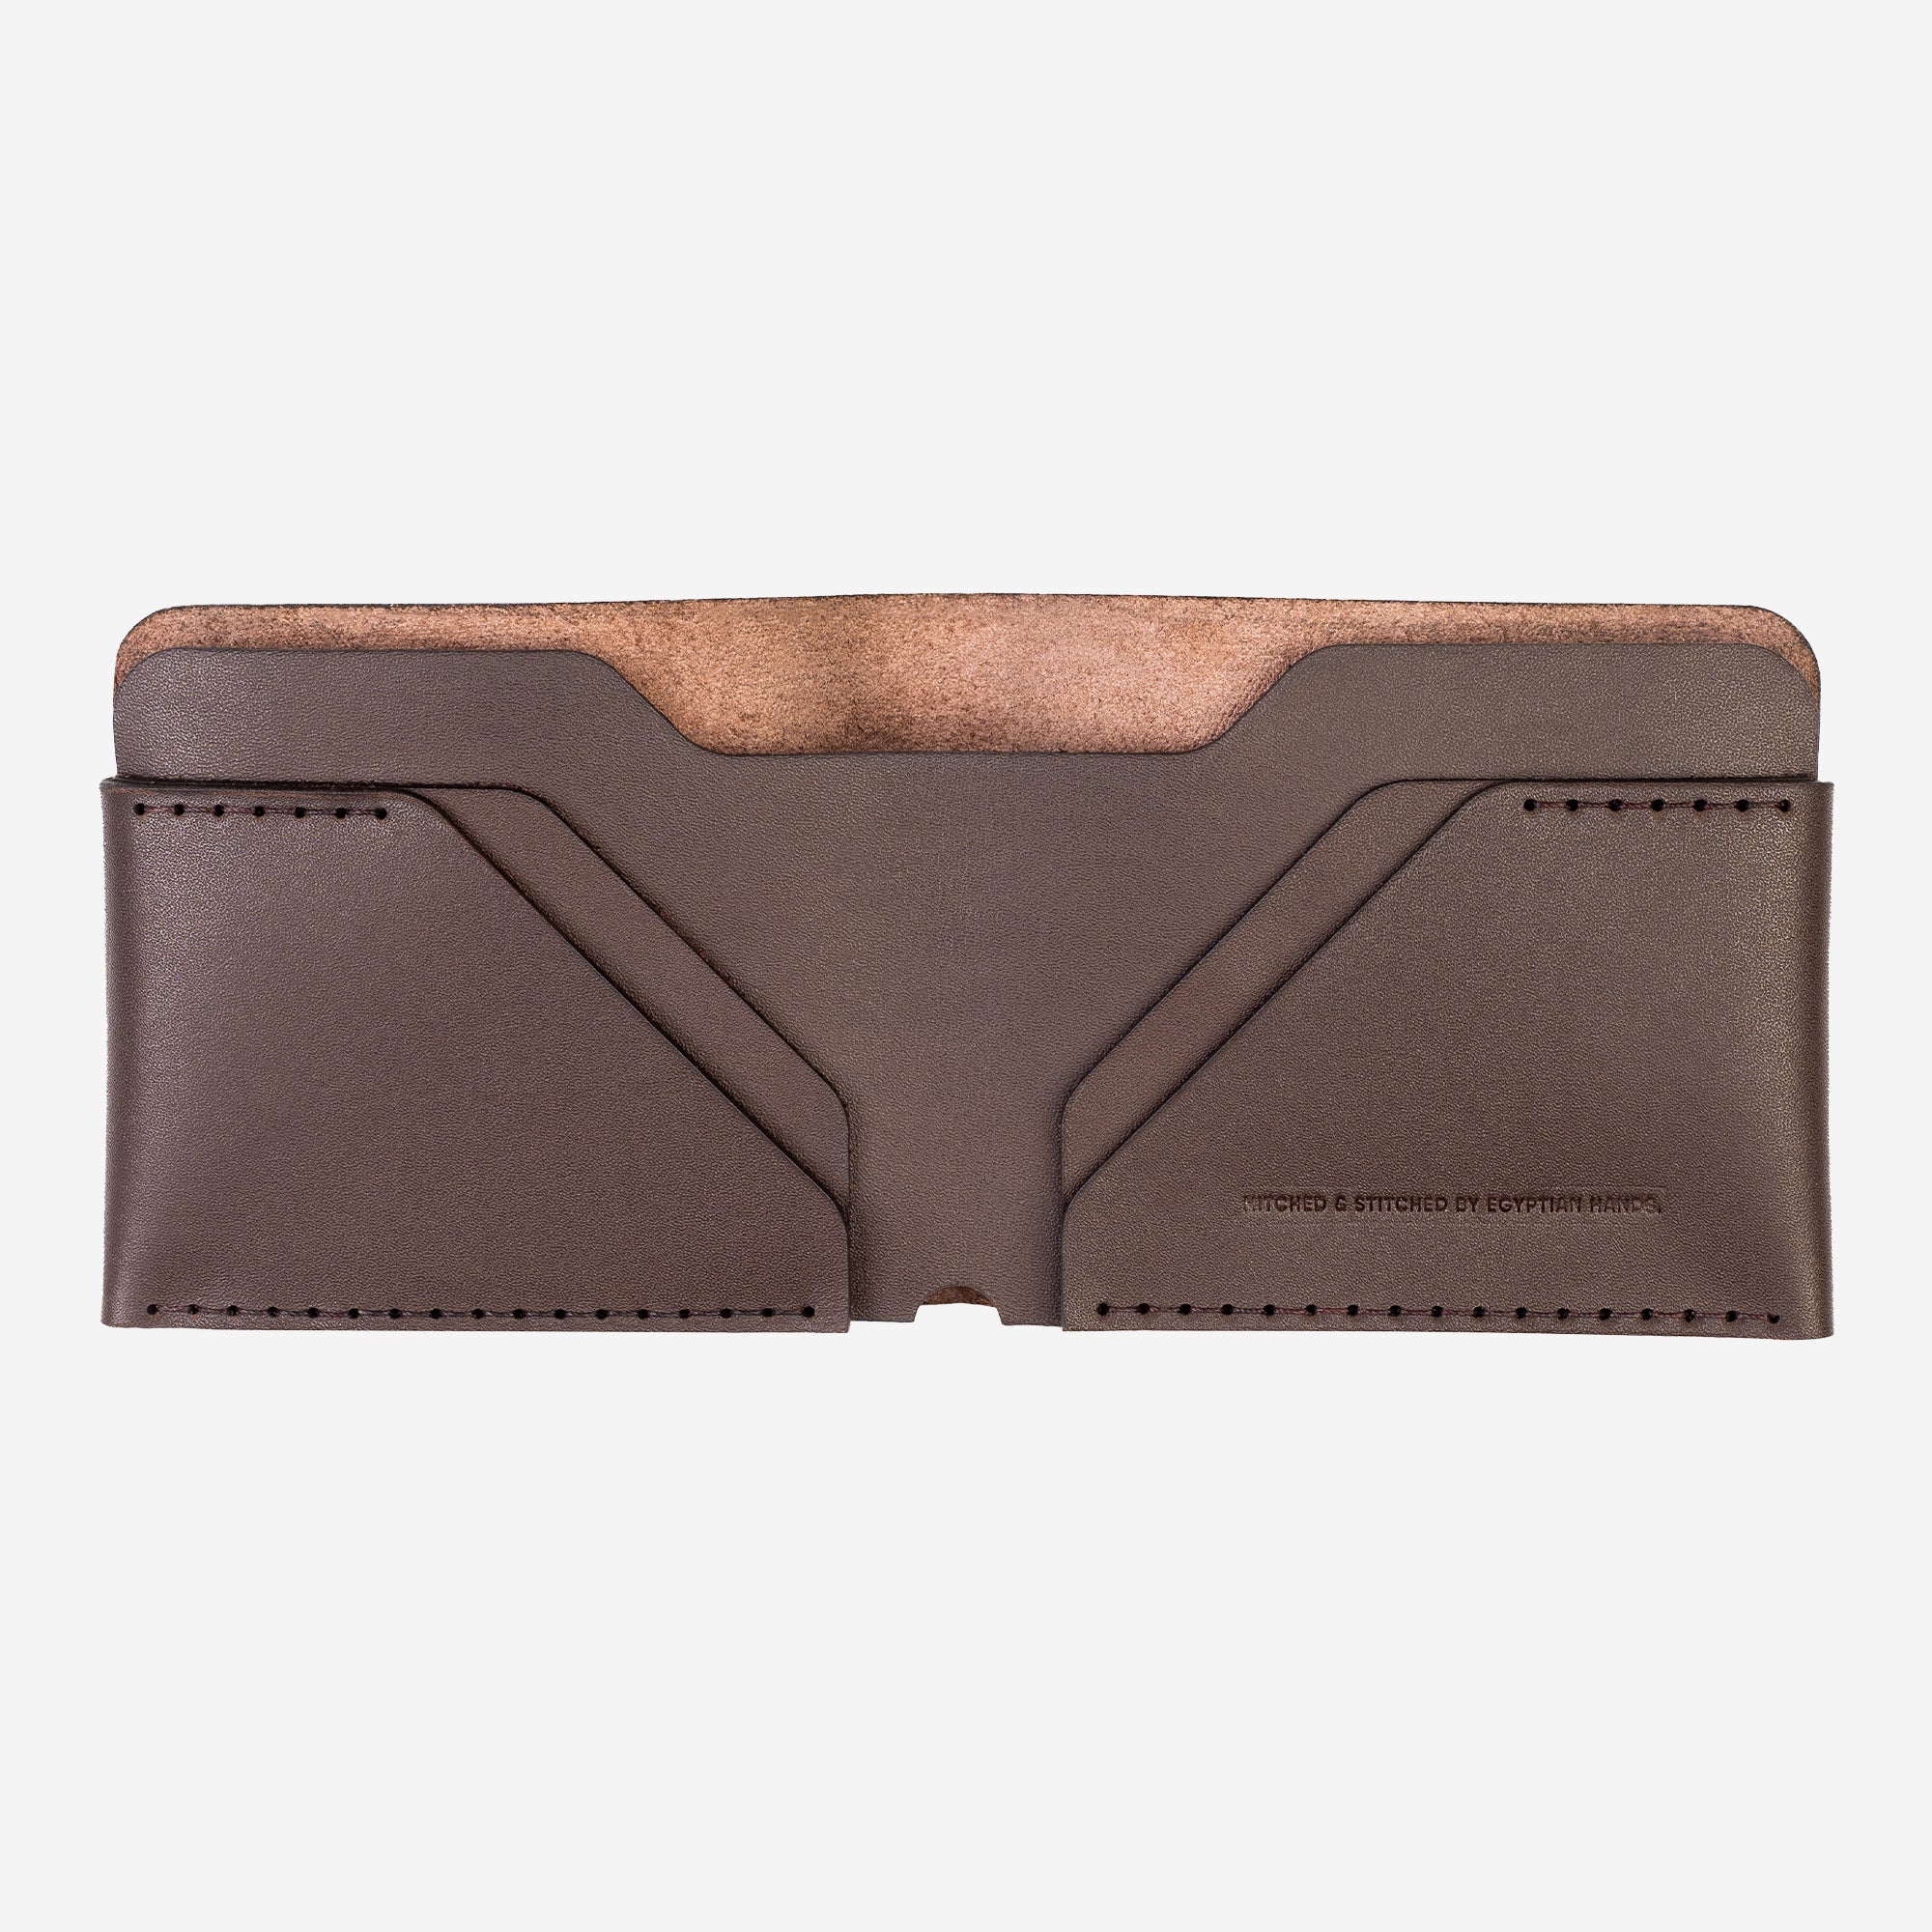 Brown leather bifold wallet with V-pocket design and cork detail on white background.